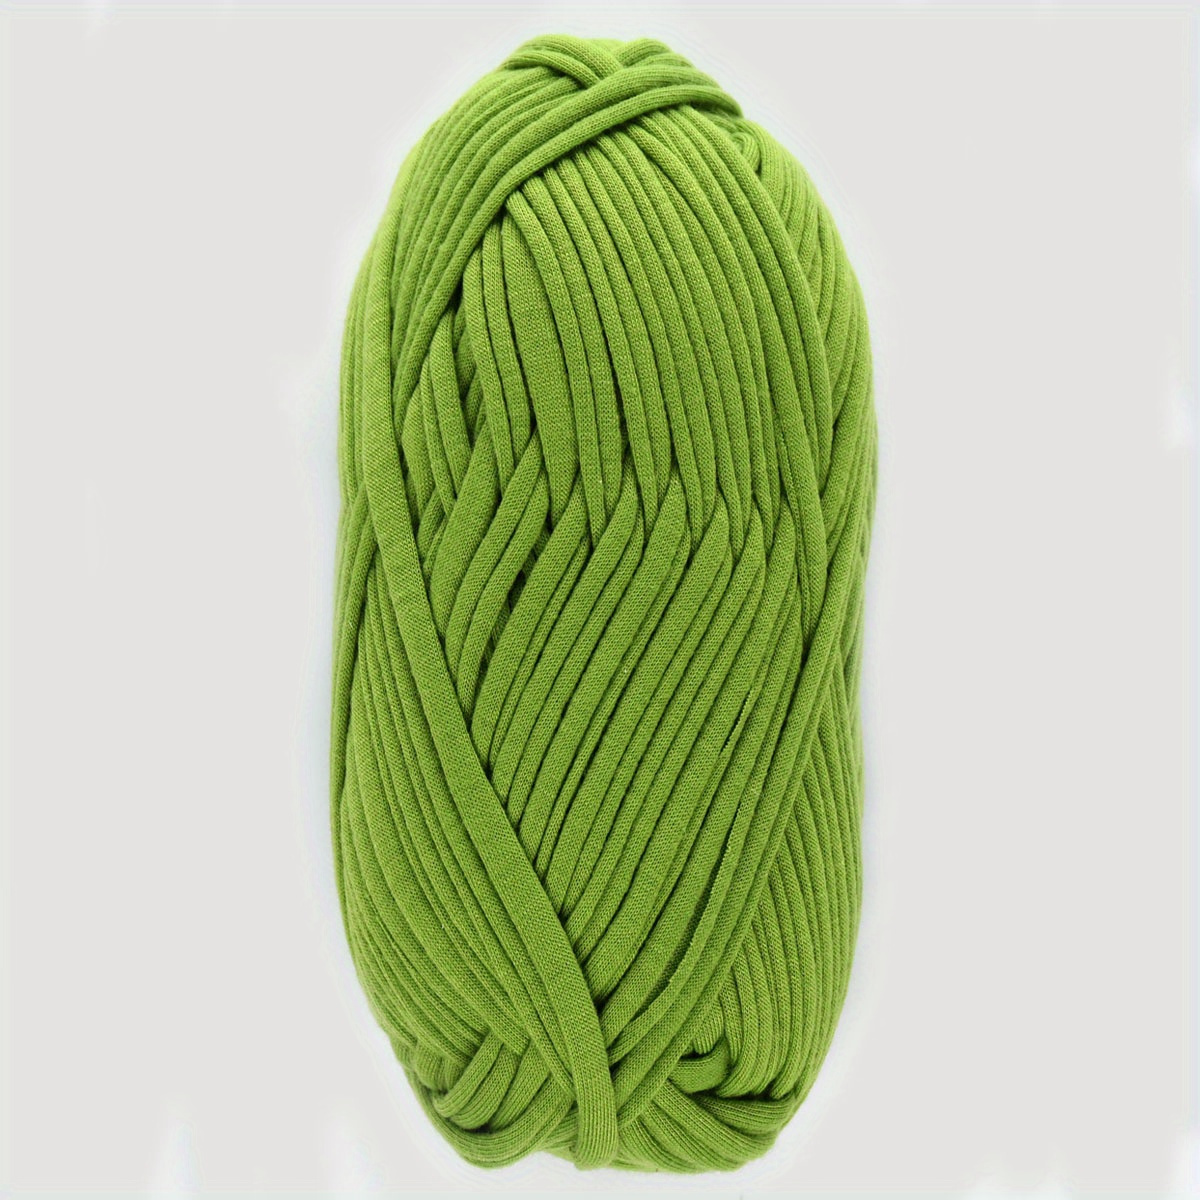 New! Yarns from Knitting for Olive. - Creative Yarns